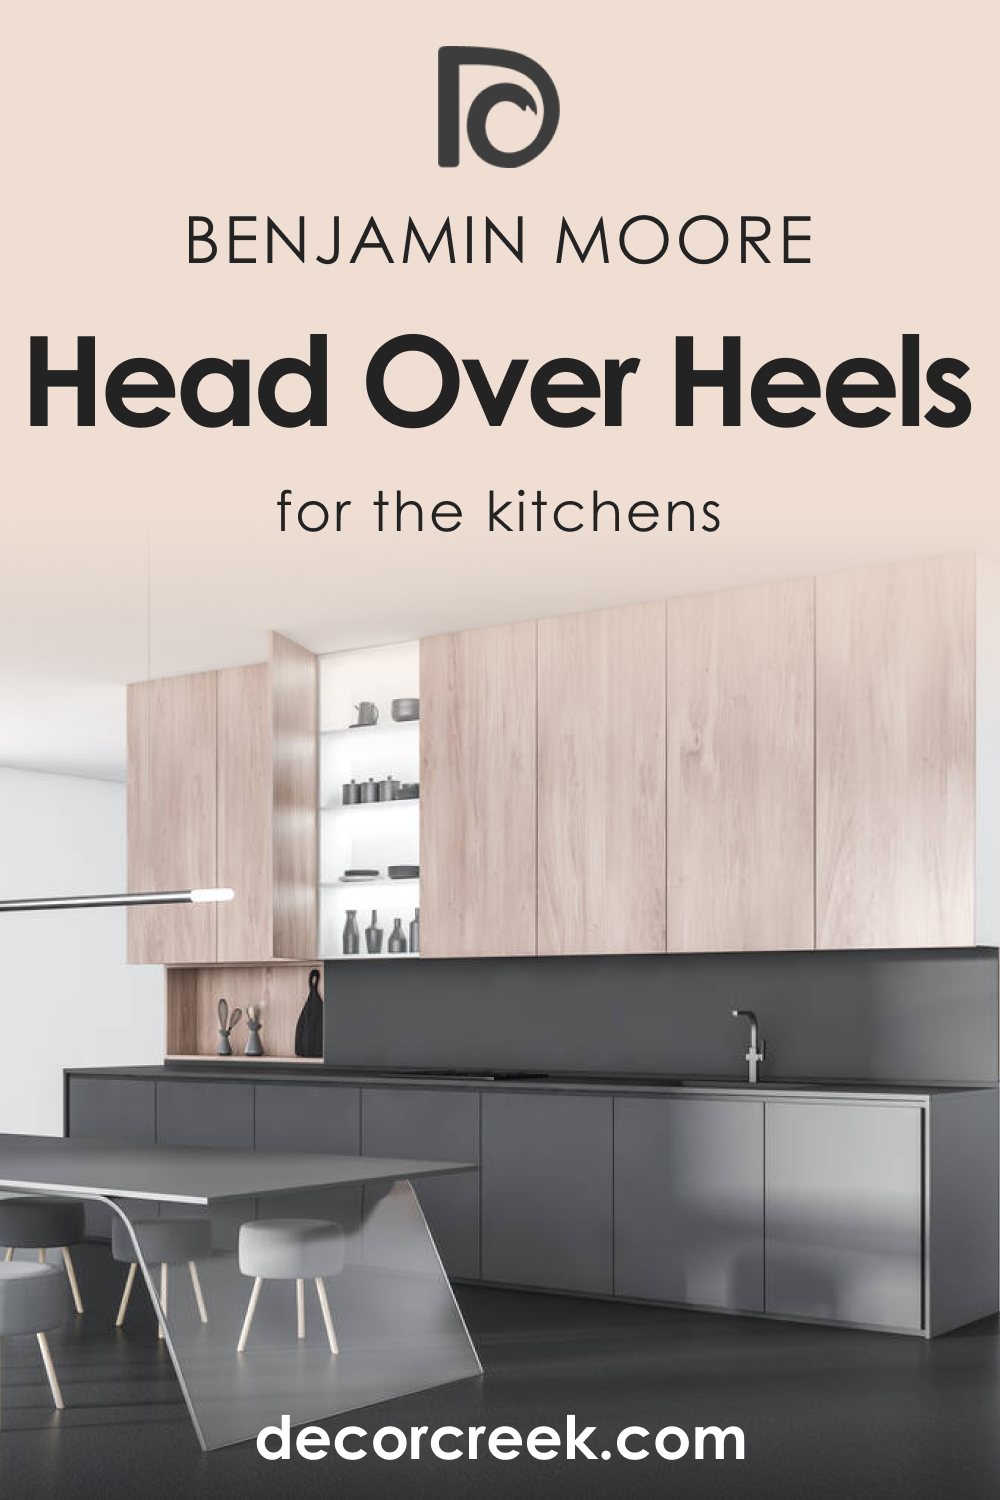 How to Use Head Over Heels AF-250 in the Kitchen?